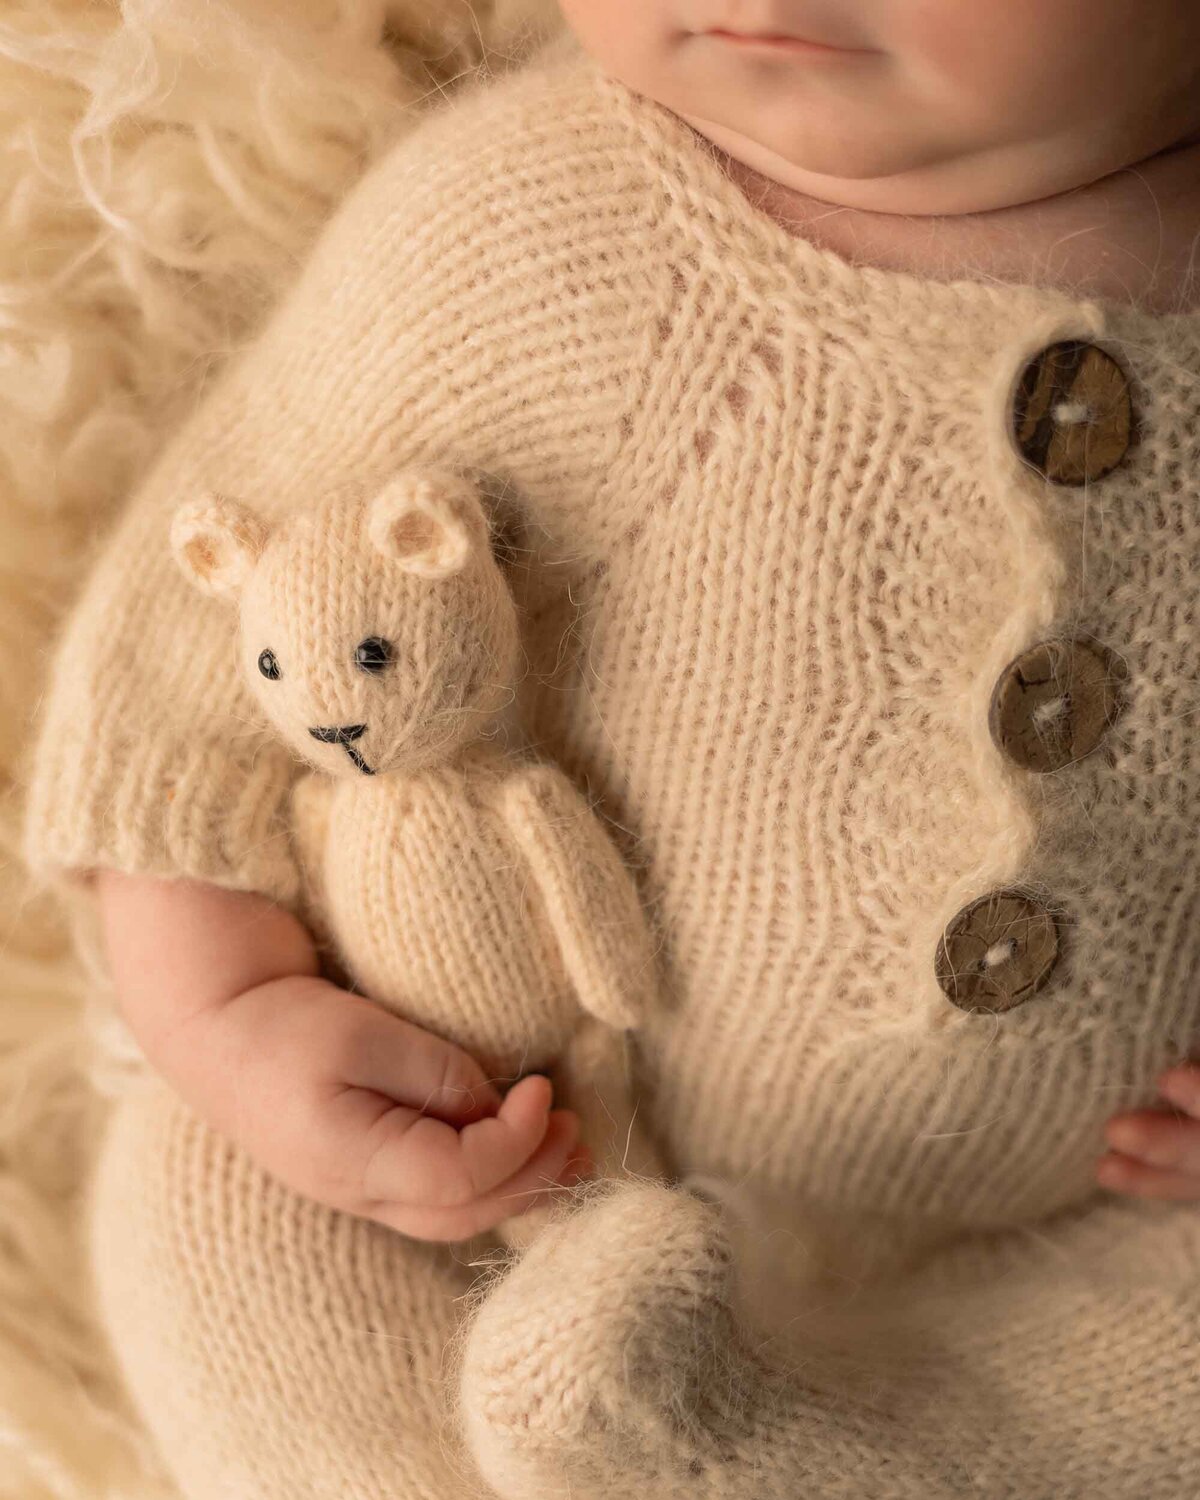 Maddie Rae Photography close up of baby in a neutral outfit on a neutral colored rug. he is holding a little teddy bear, that is the focus